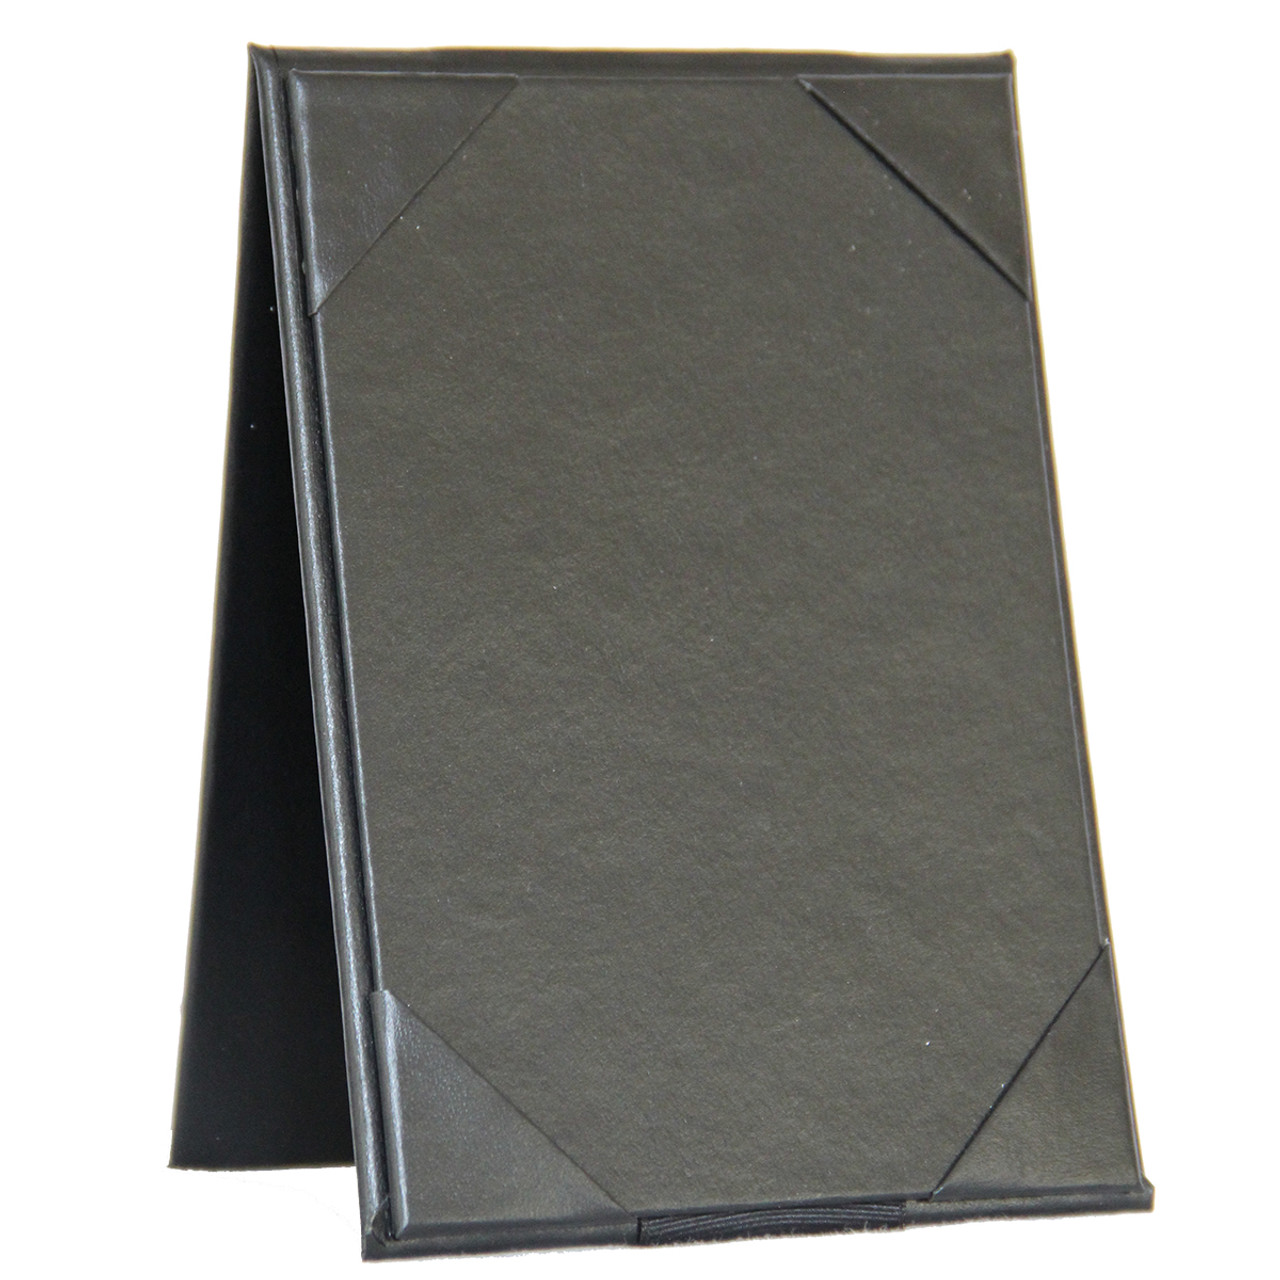 Note Paper Holder - Ostrich Leather - Black